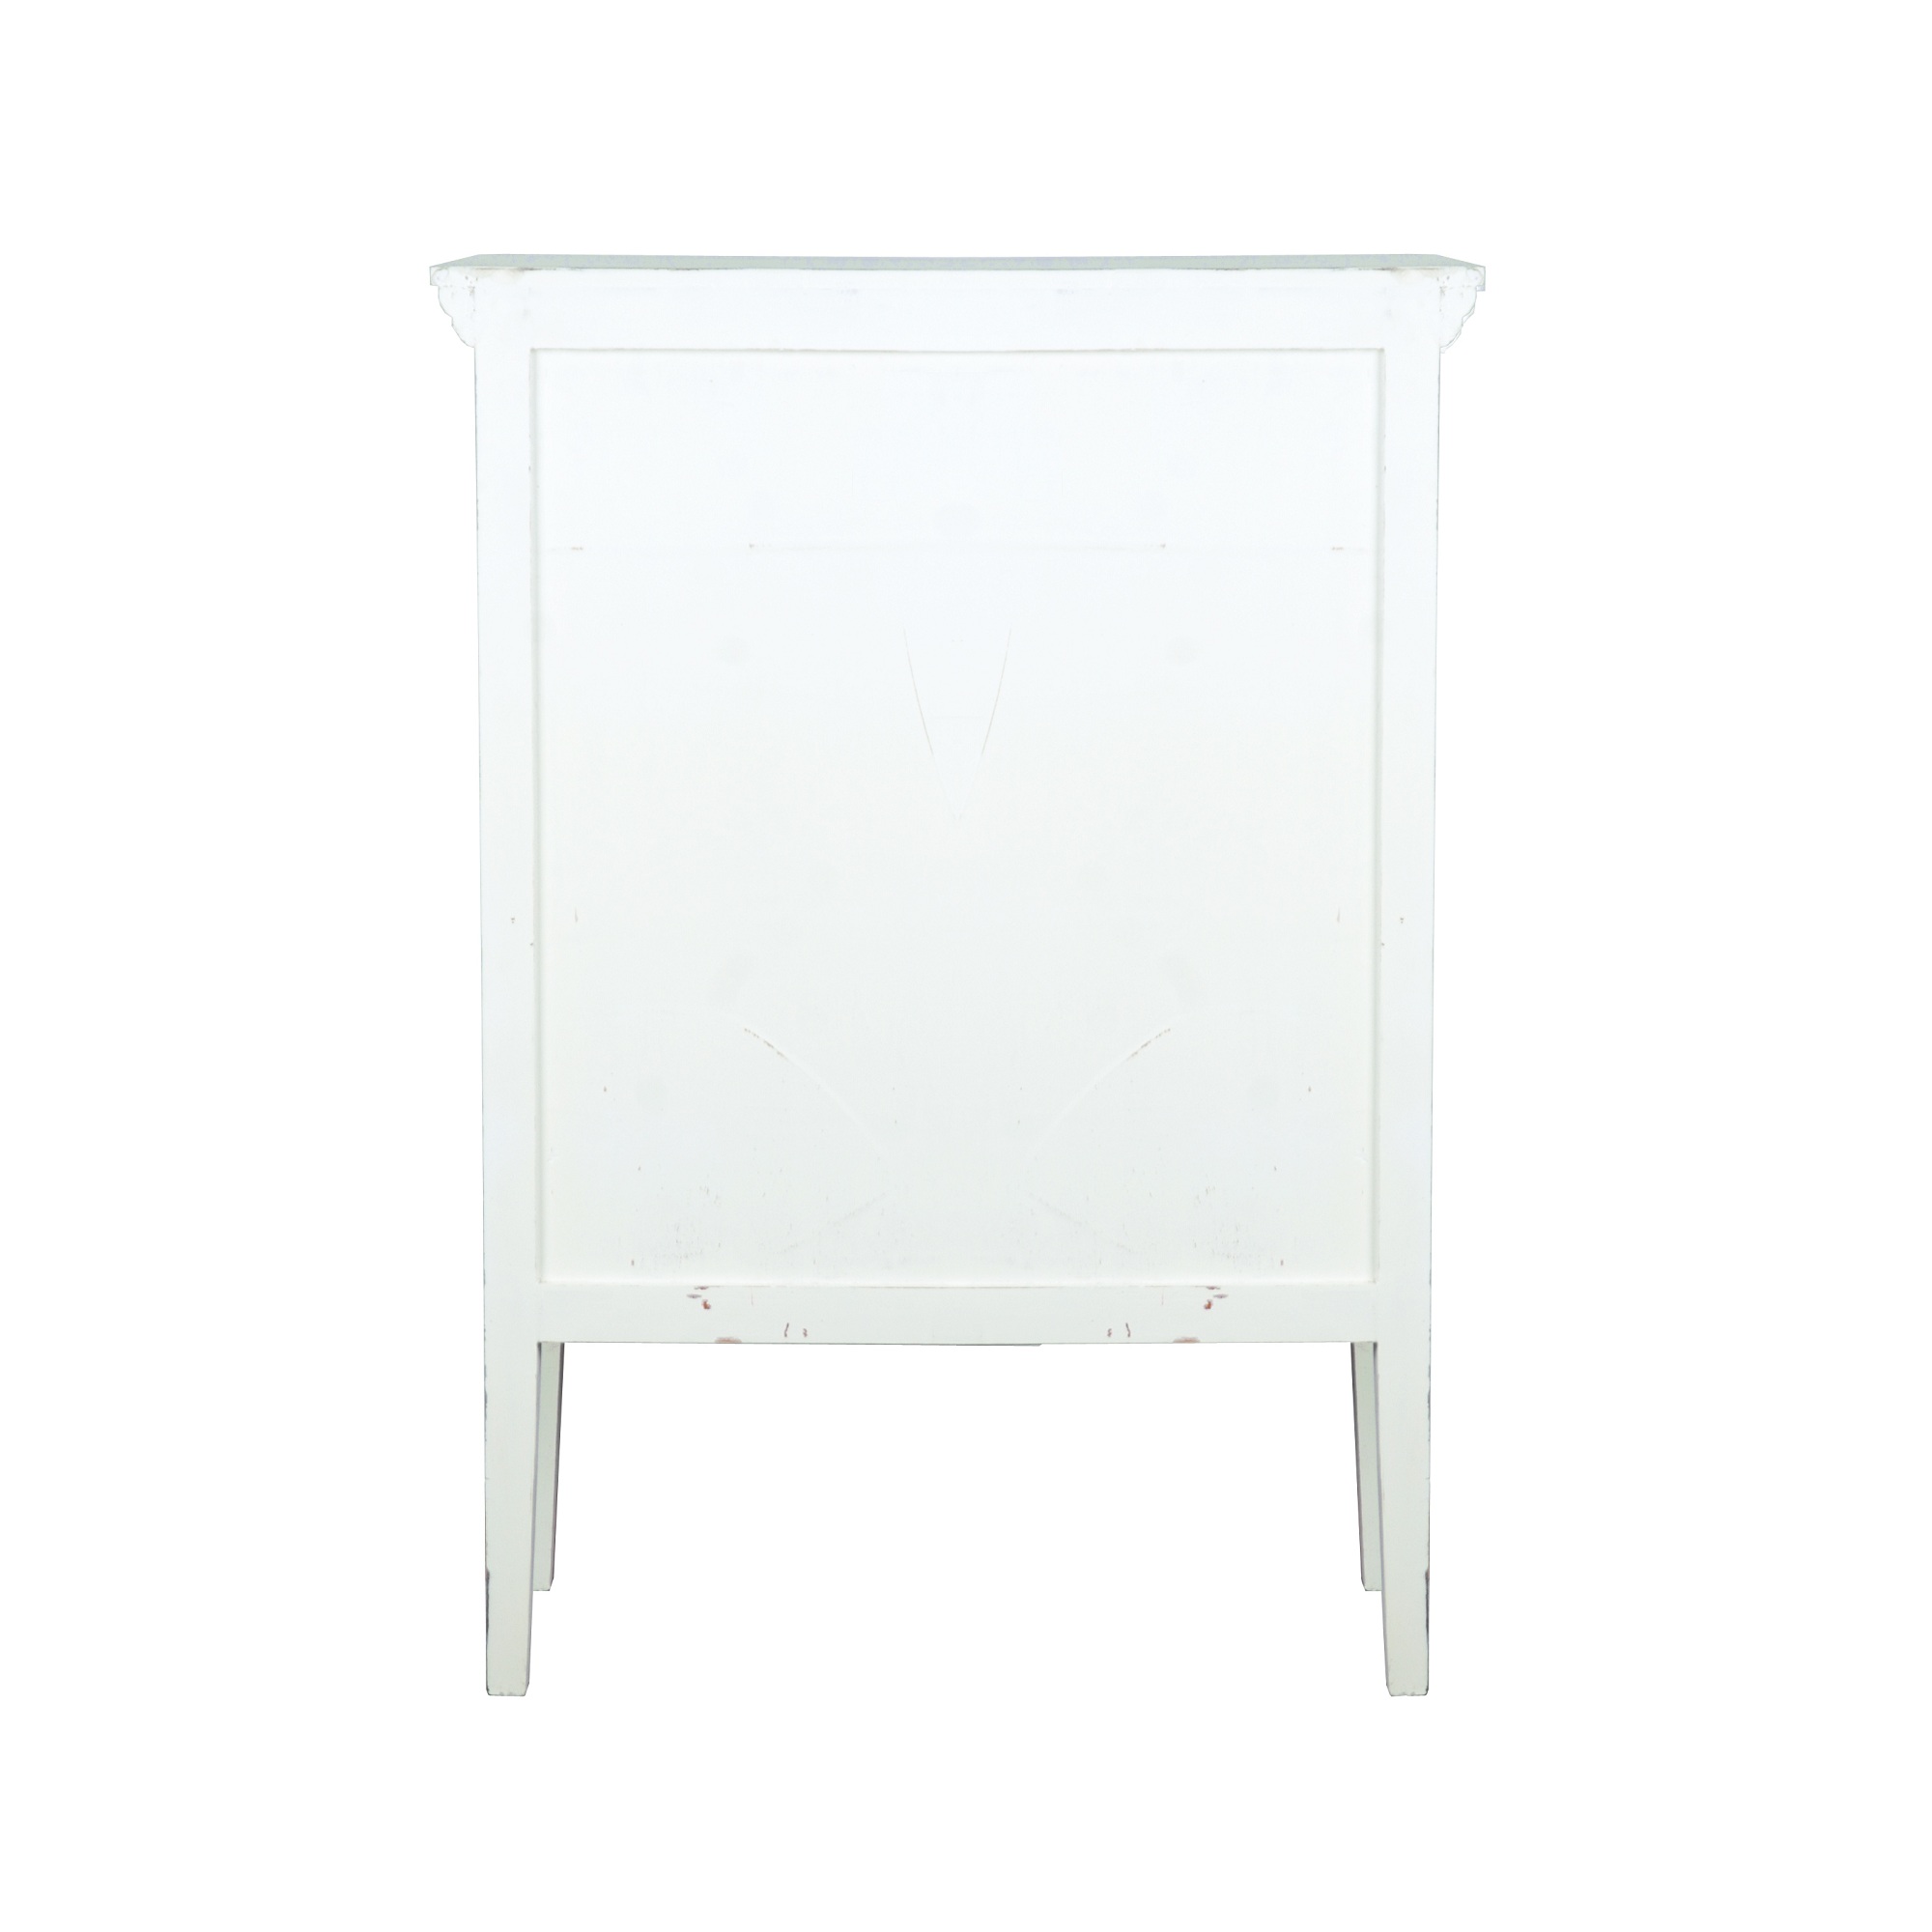 The Hamptons Collection 48" Antique White Sunset Tradinmg 2 Wire Door Cottage-Country Cabinet